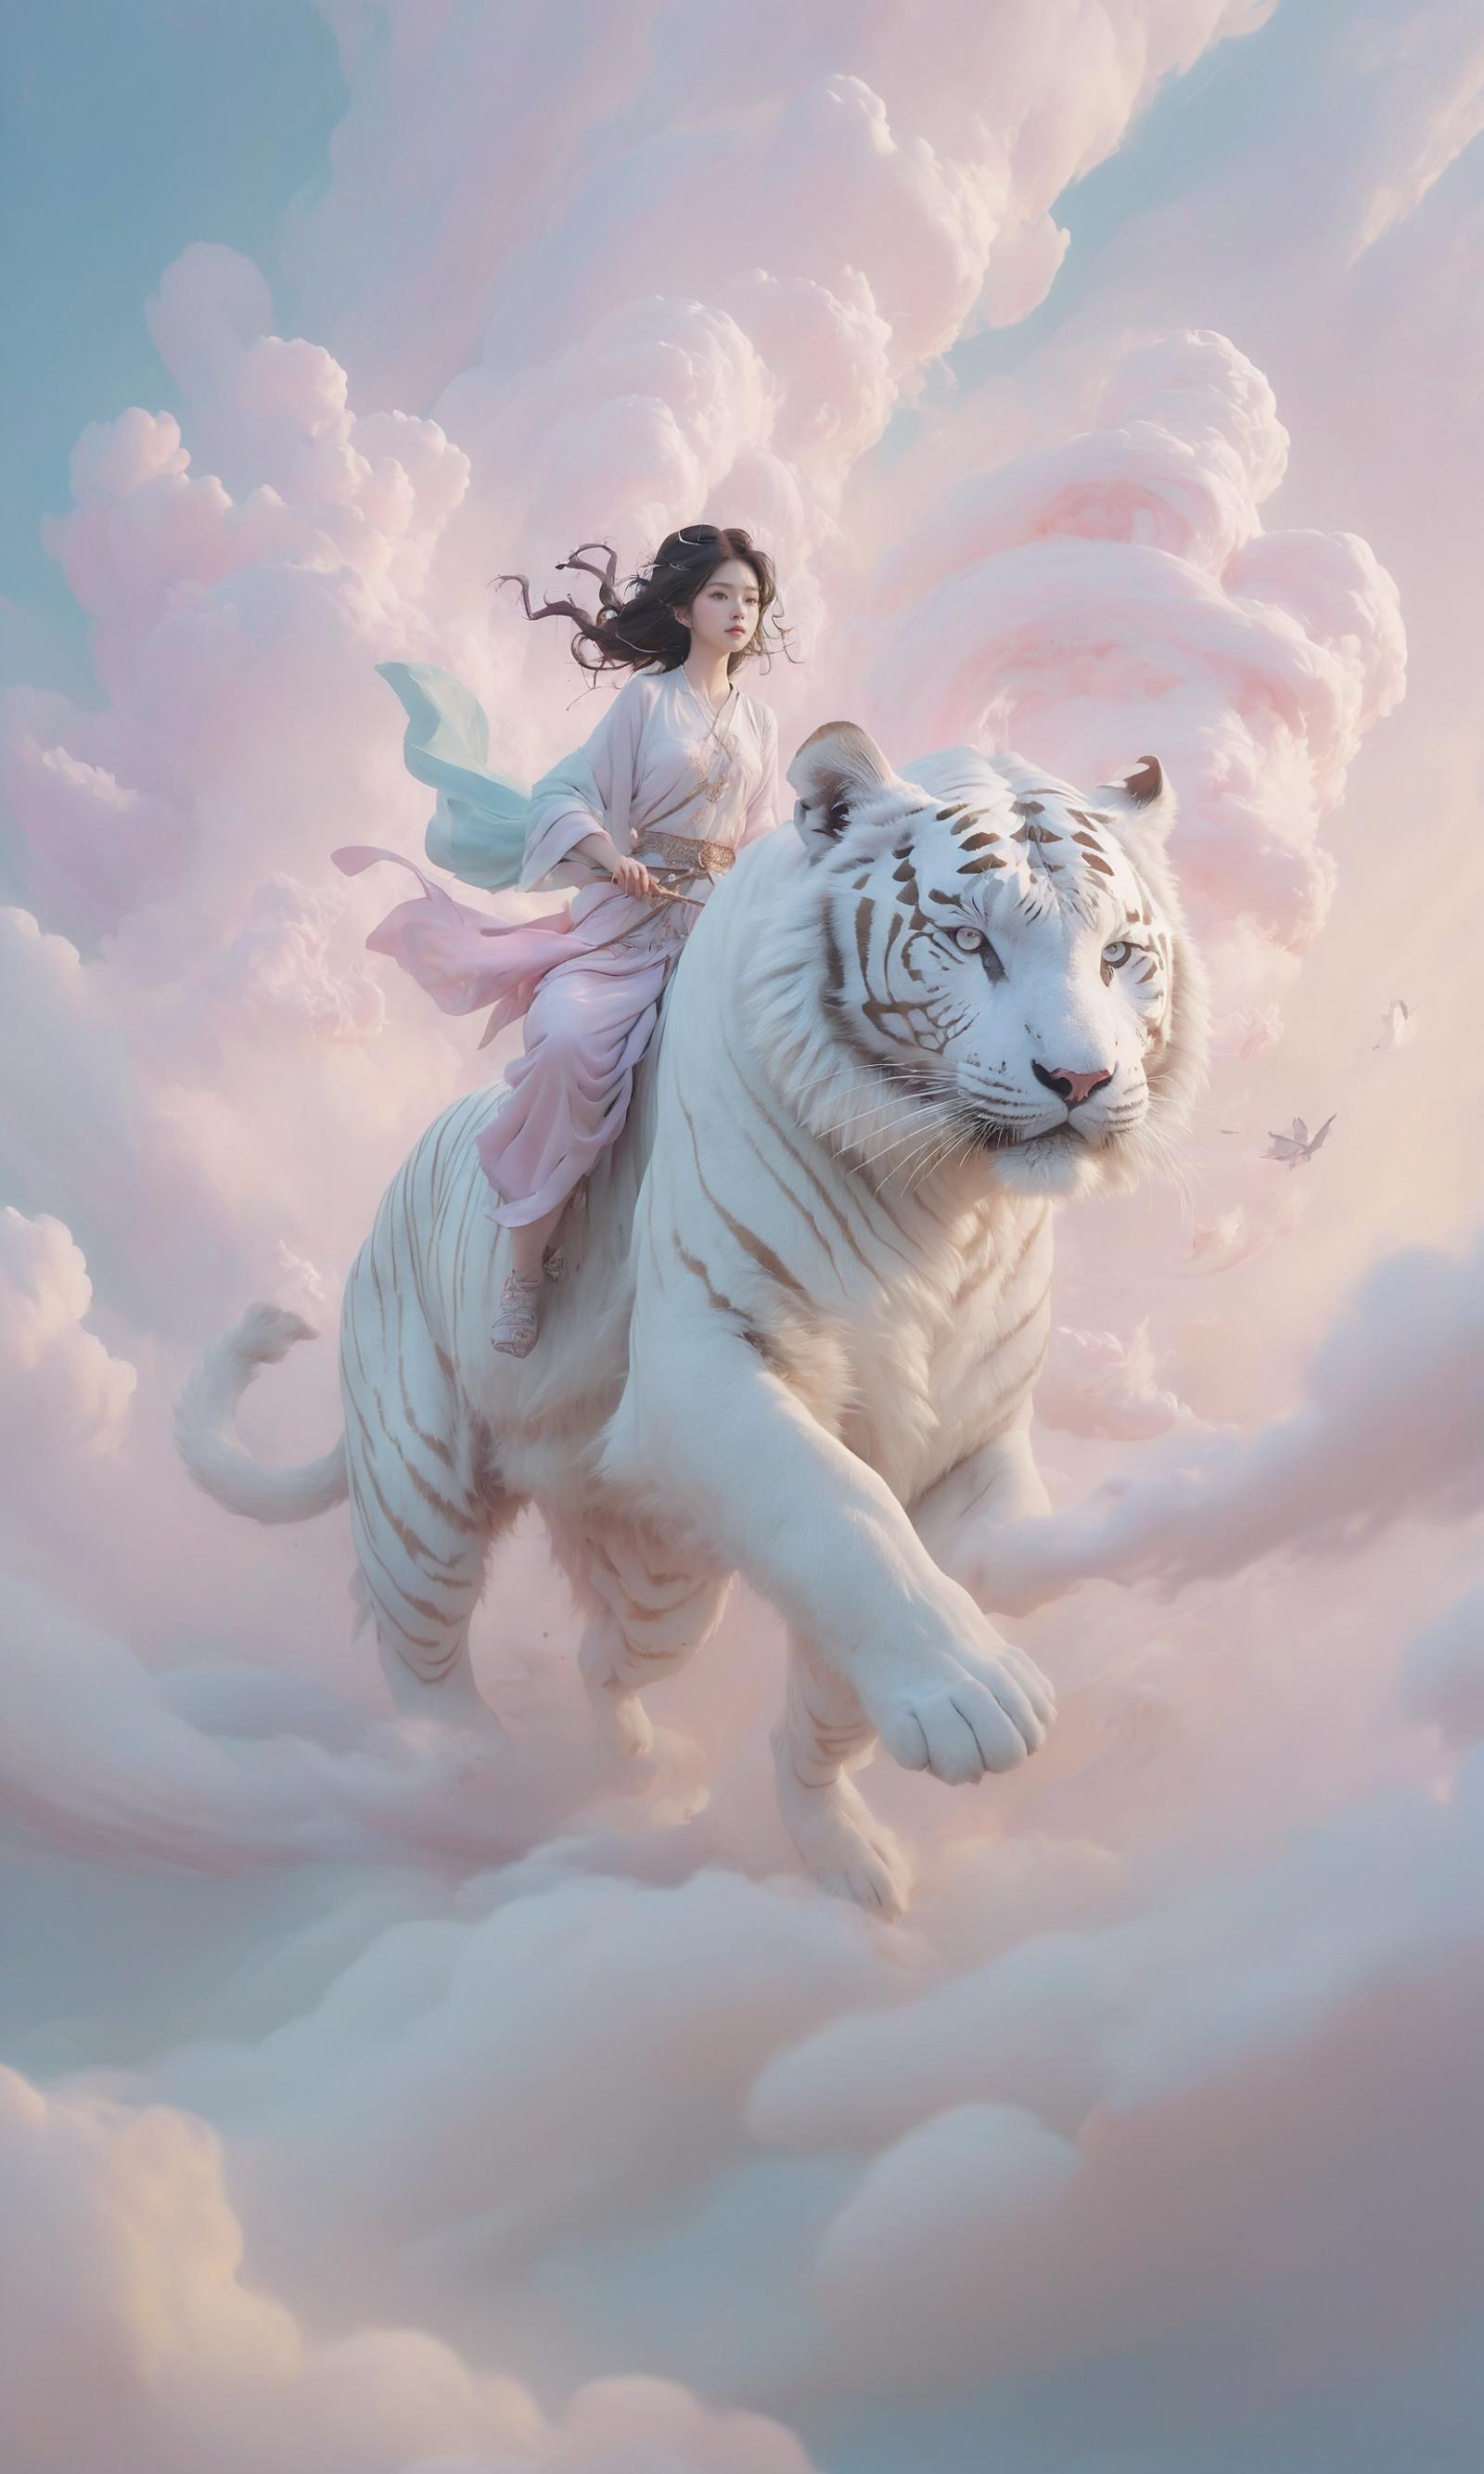 A woman riding a white tiger in a cloudy sky.